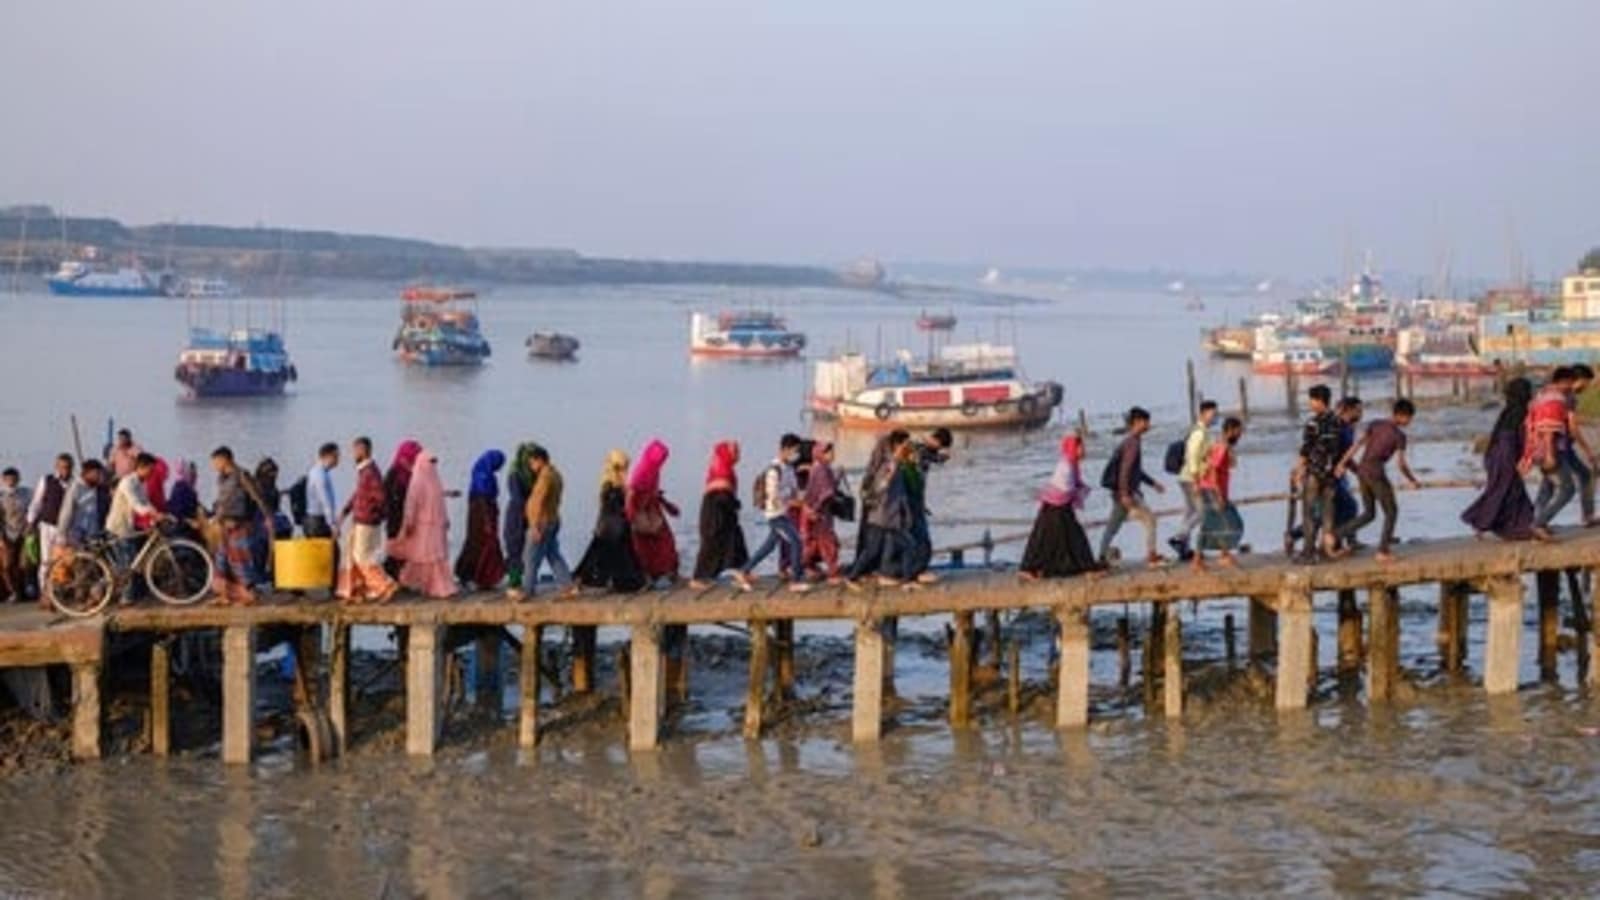 For climate migrants in Bangladesh, town offers new life